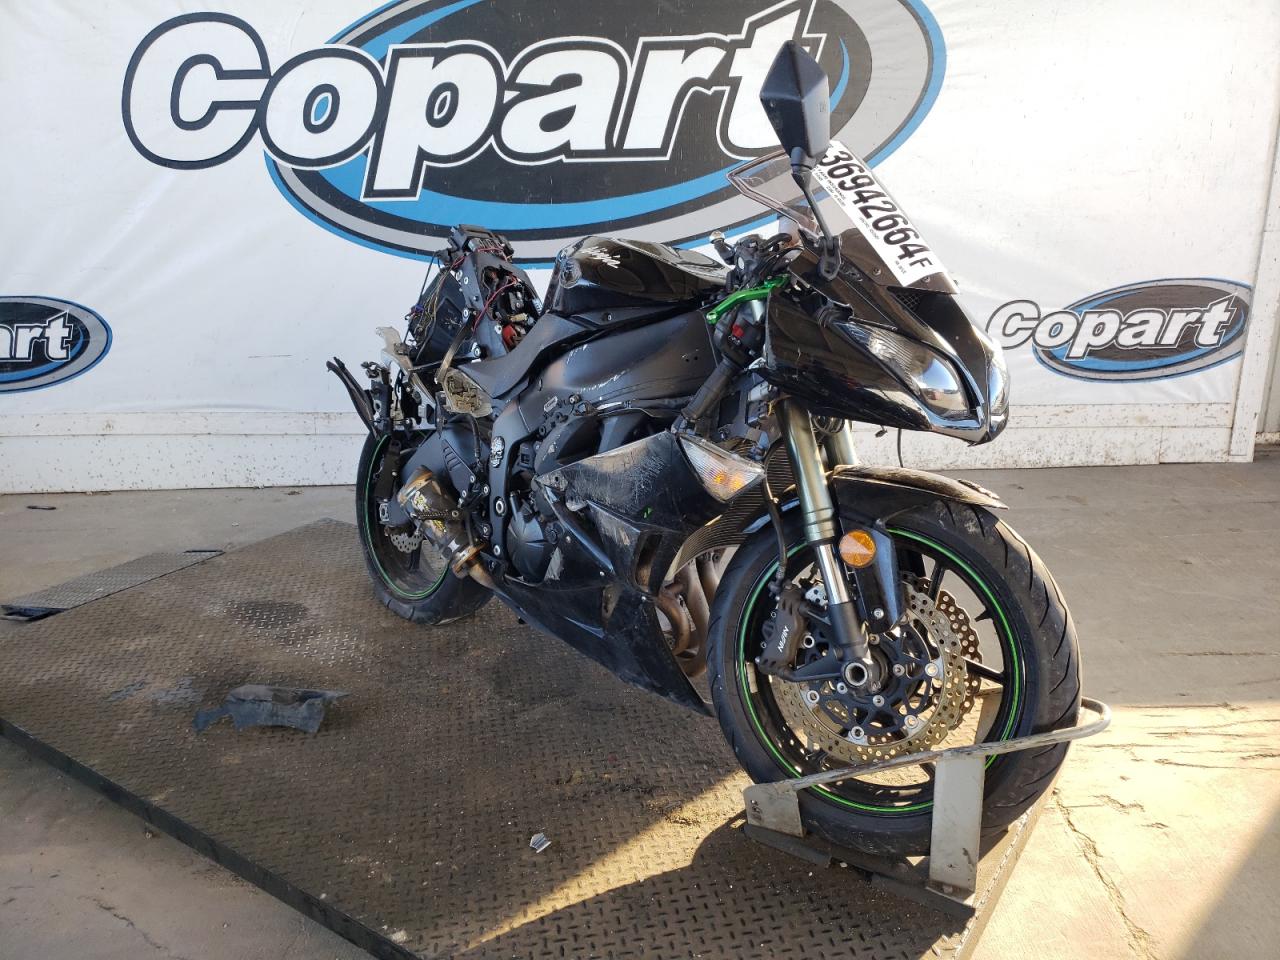 Buy 2009 Kawasaki Zx600 R 4 JKAZX4R189A****** from USA Auctions 